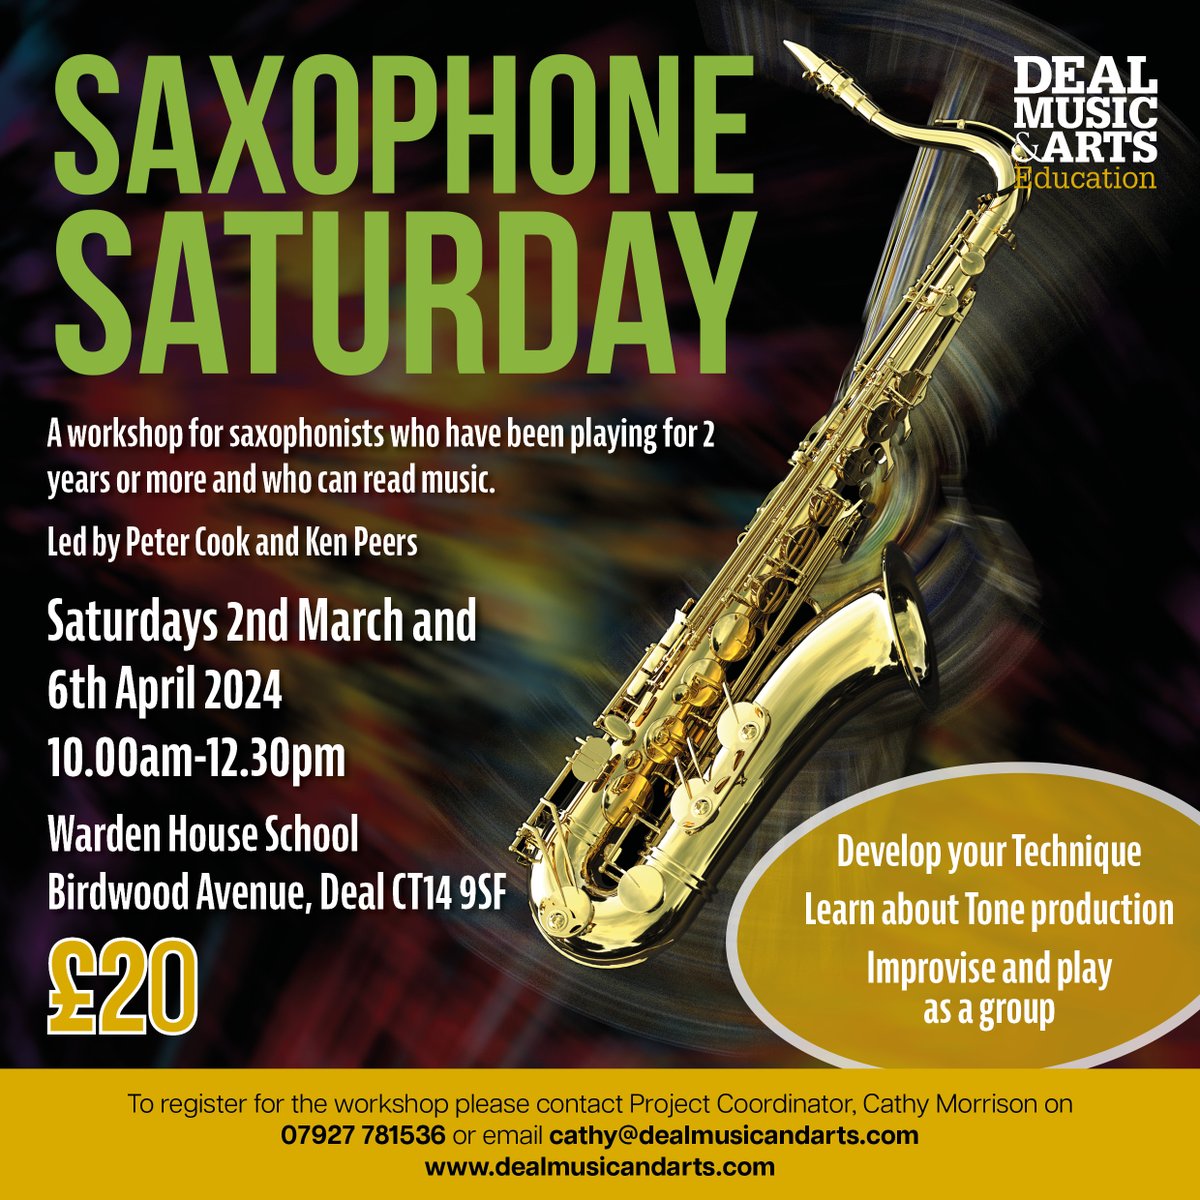 Next saxophone workshop this Saturday, 6th April. Join our experienced tutors for a morning of all things 'sax'! Book your place now cathy@dealmusicandarts.com #saxophone #workshop #dealkent #musiceducation #dealmusicandarts @whatsoninkent @kentlivewhatson @VisitDover @VisitKent